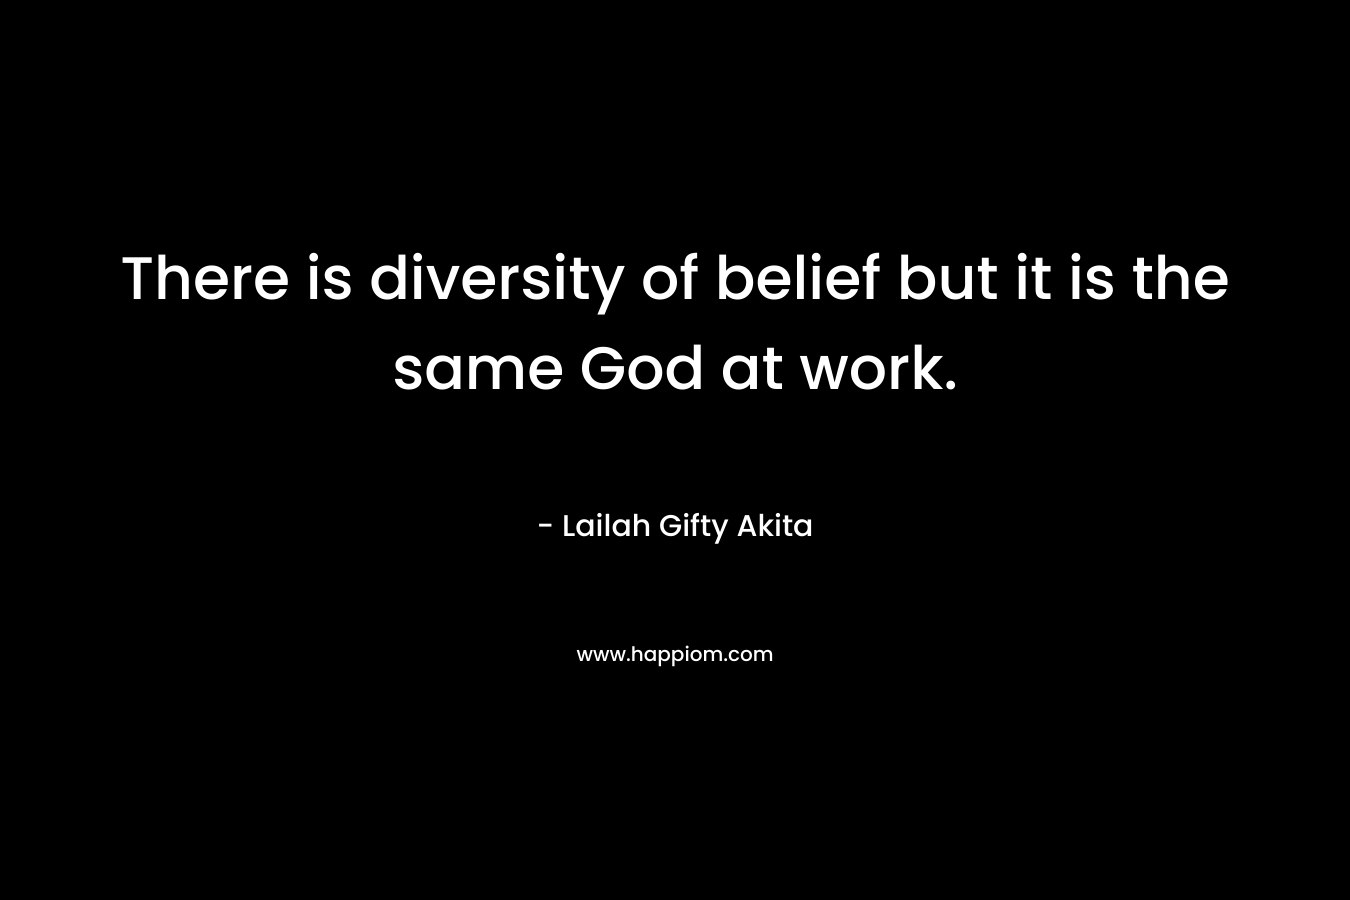 There is diversity of belief but it is the same God at work. – Lailah Gifty Akita